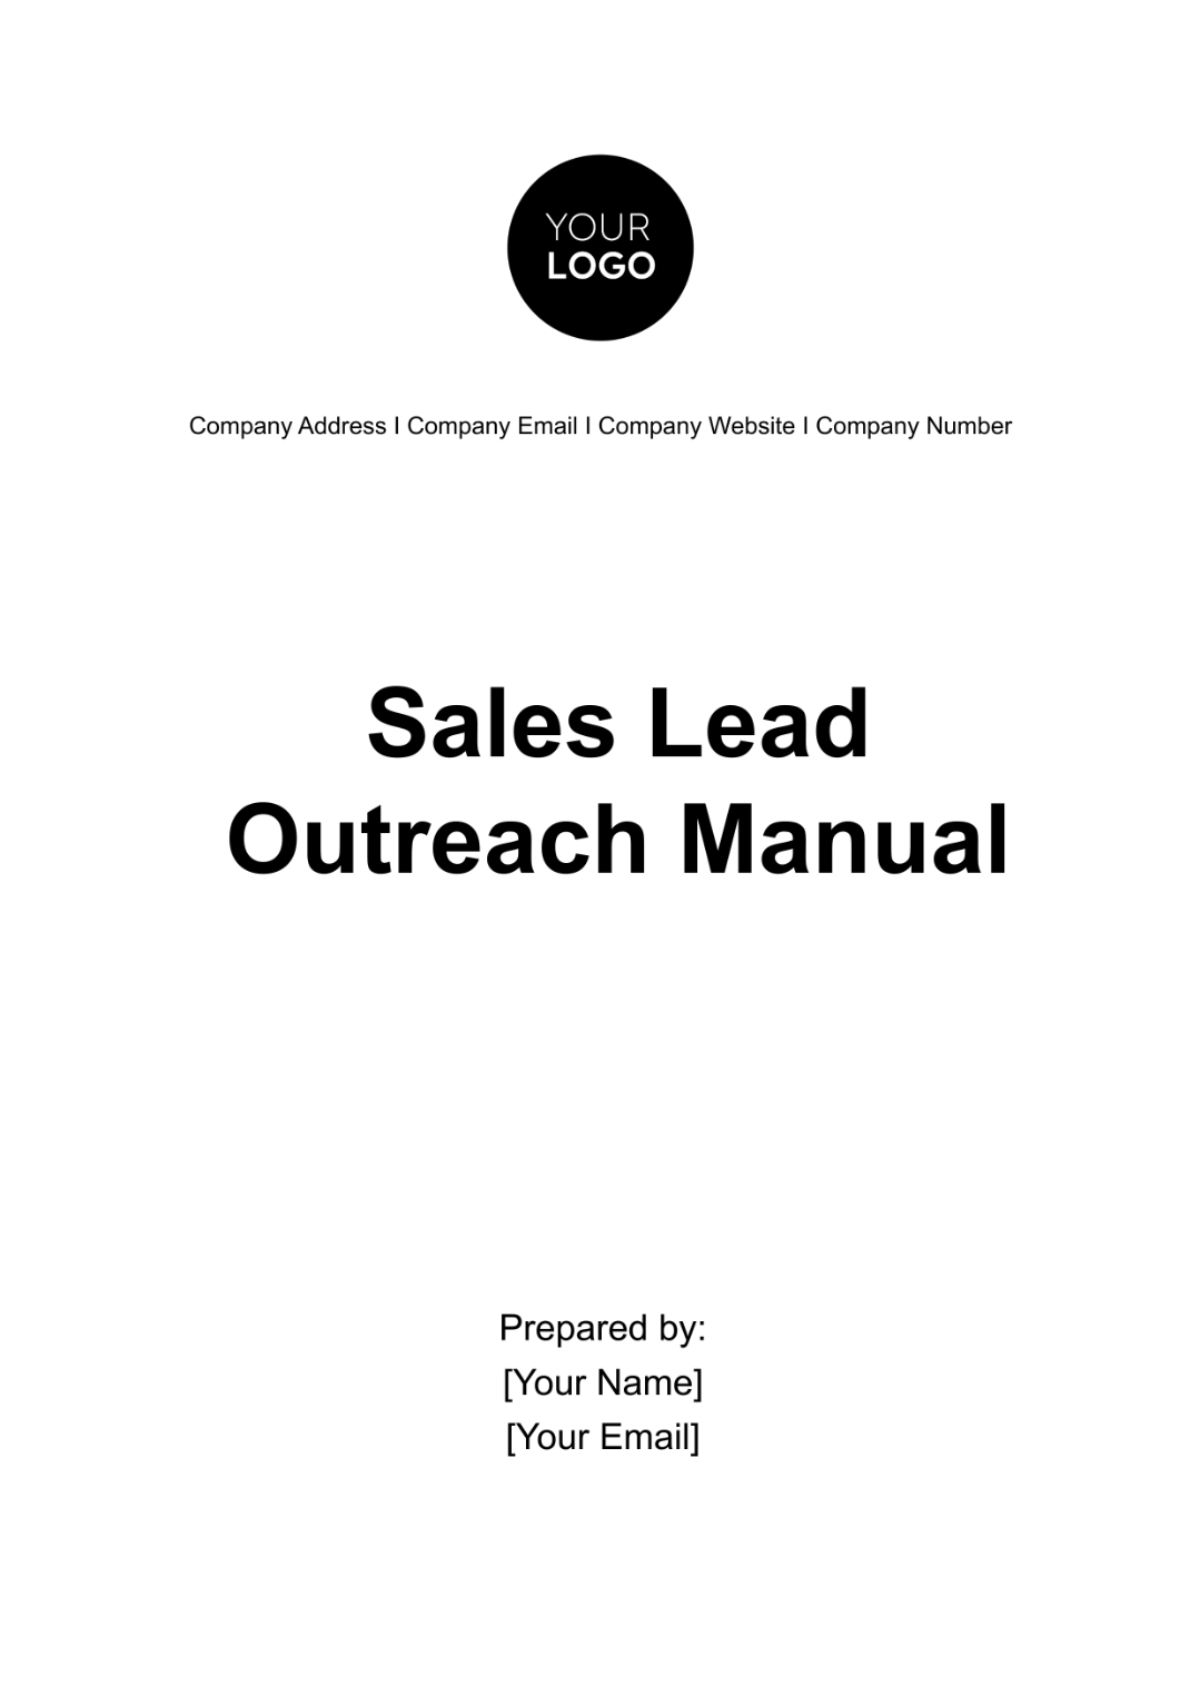 Free Sales Lead Outreach Manual Template